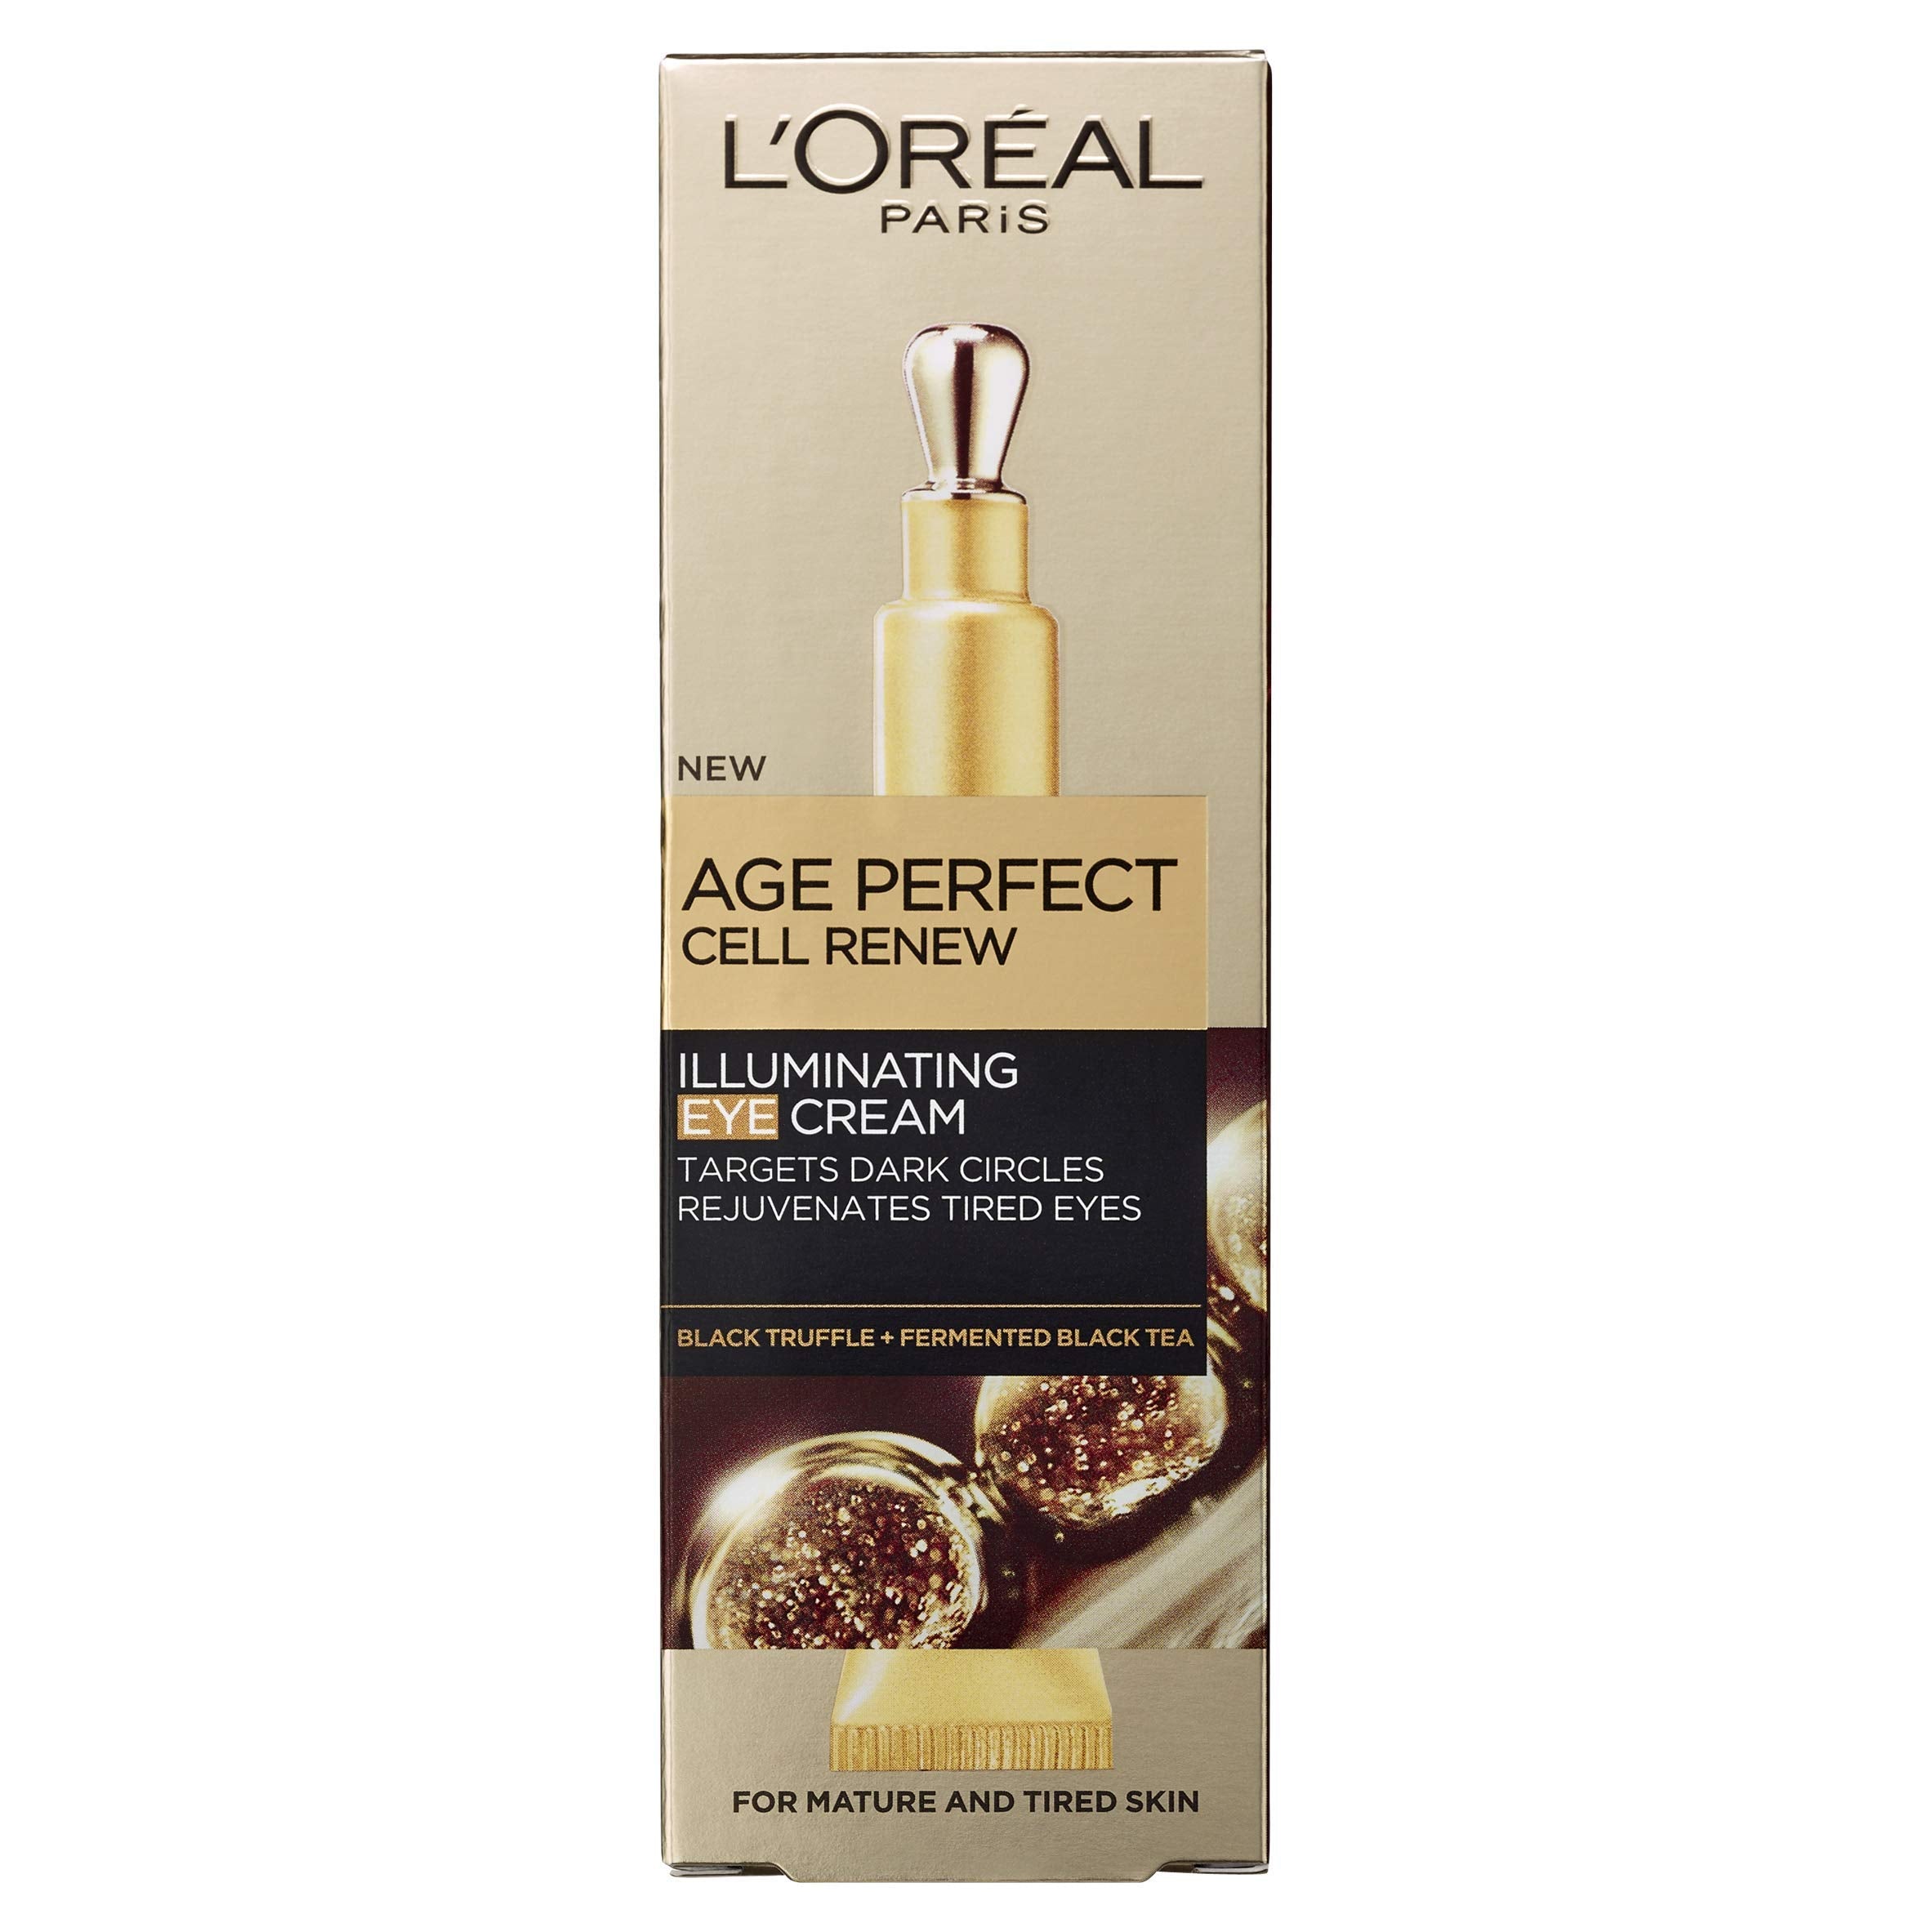 Skin Expert L'Oreal Paris Age Perfect Cell Renew Illuminating Eye Cream with Cooling Applicator for Mature Skin, 15 ml